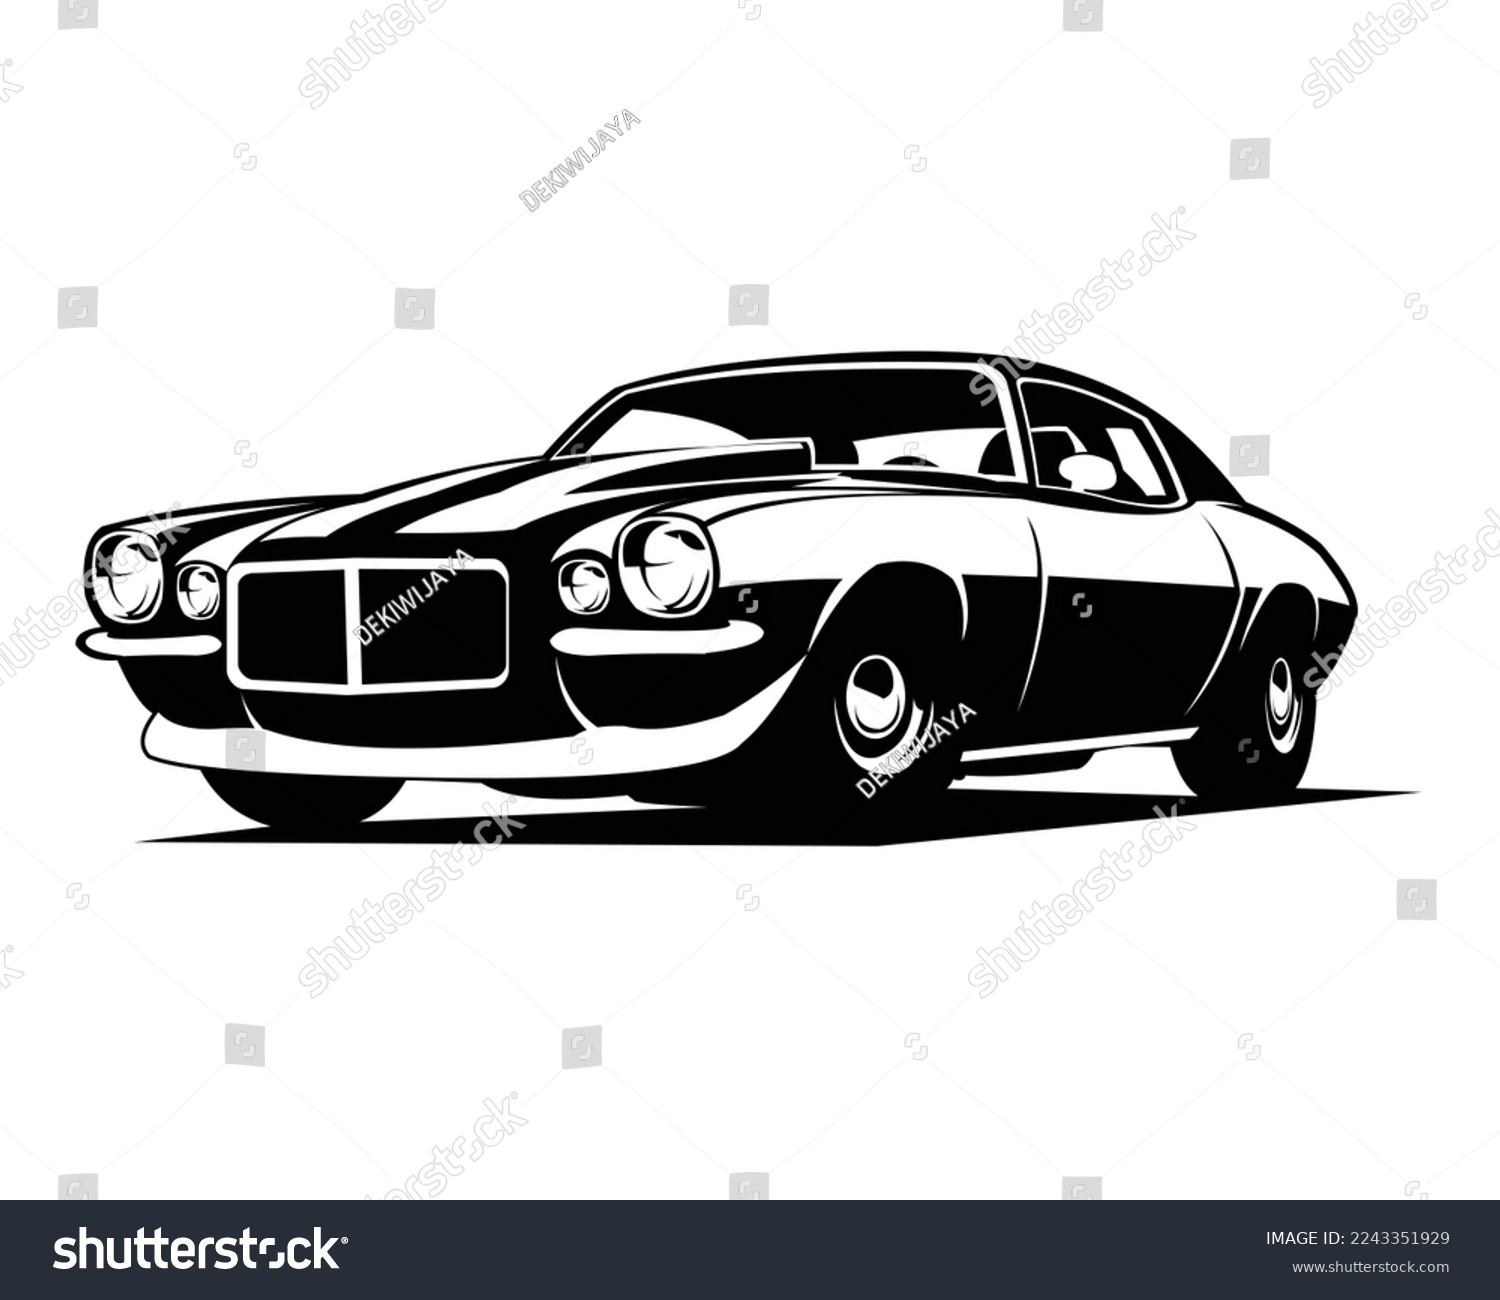 SVG of chevy camaro car. white background isolated vector silhouette showing from the front. Best for badge, emblem, icon, sticker design, car industry. svg